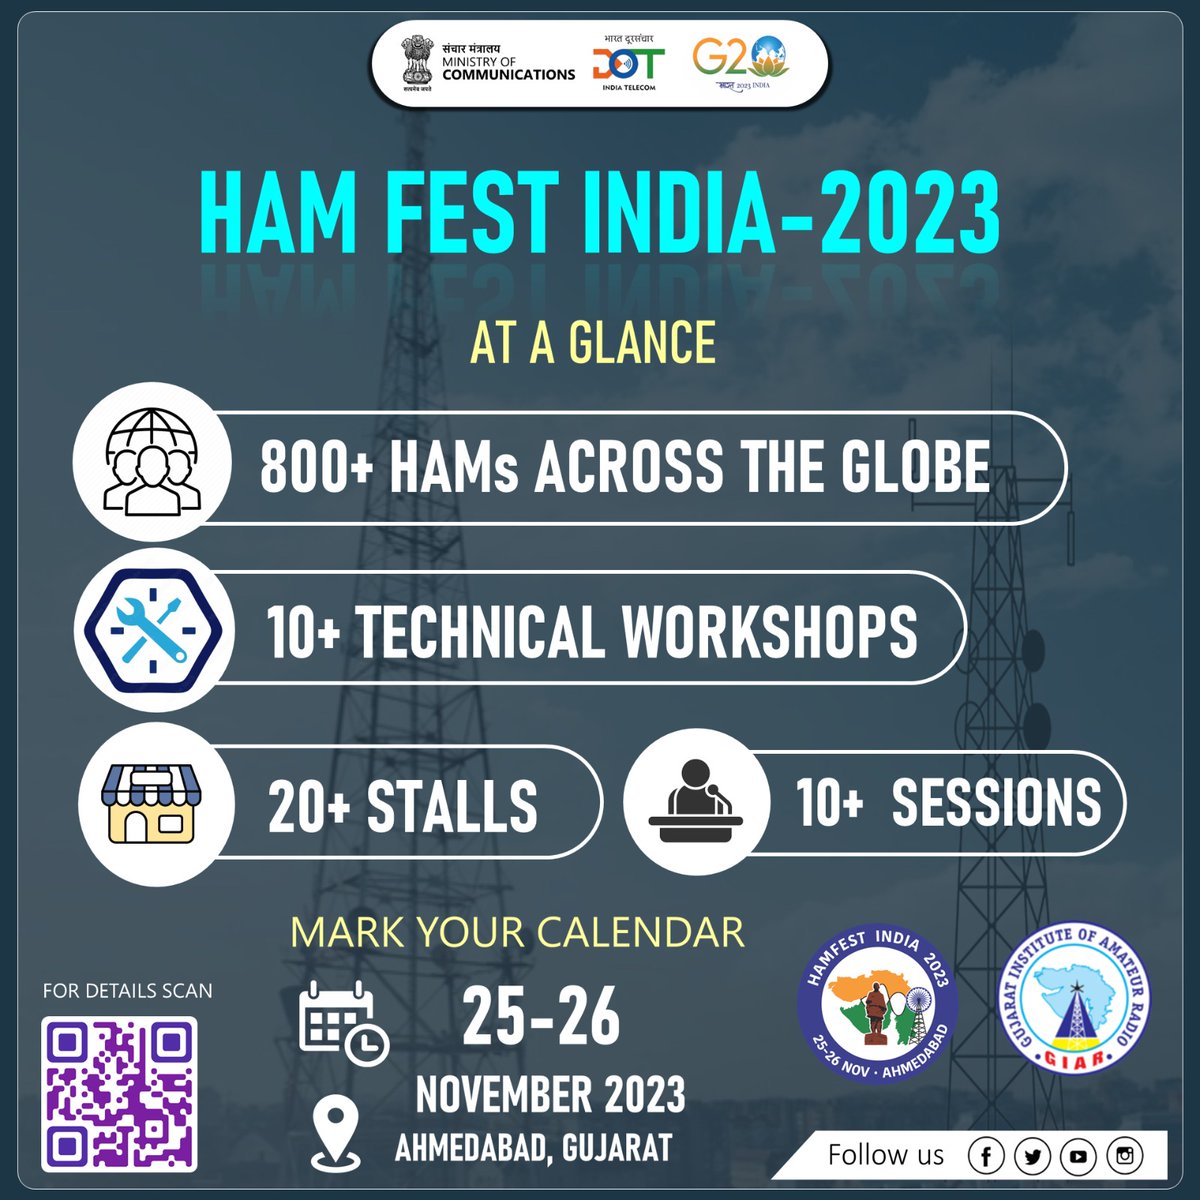 Get set for #HFI23 - HAMFEST INDIA-2023! Join the global Amateur Radio community at VIGYAN BHAWAN, Science City, Ahmedabad, Gujarat from Nov 25-26, 2023. ▶️800+ HAMs across globe, ▶️10+ technical workshops, ▶️20+ Stalls Don't miss out incredible tech & experimentation event.